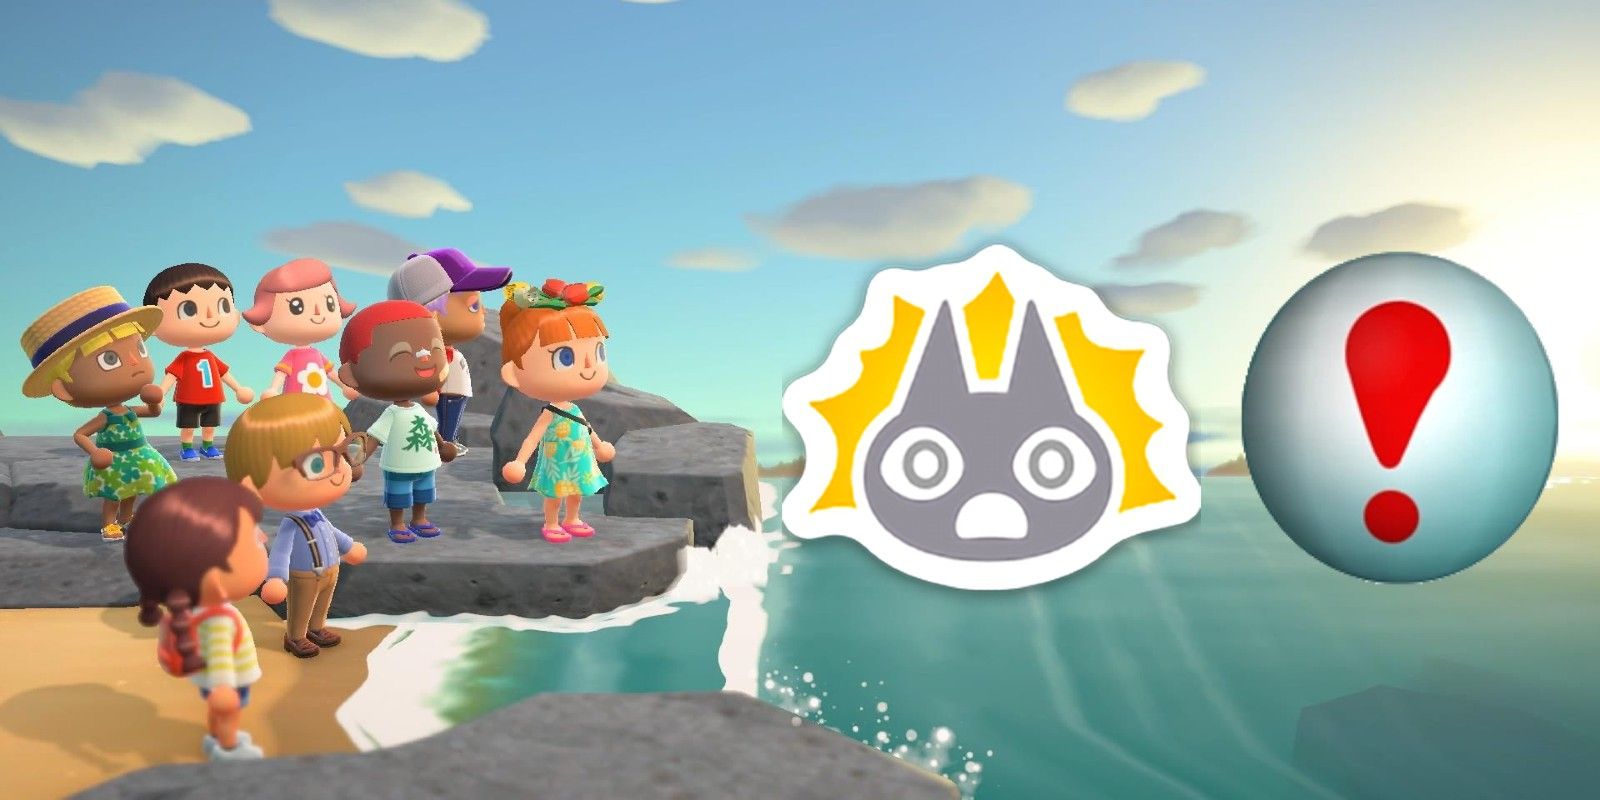 A collage from Animal Crossing: New Horizons. The background is a beach and cliffs as featured on a New Horizons Island. On the left, 8 villagers are gathered, looking out to the sea. Floating above the sea are the shock reaction symbol (left) and the pitfall seed (right) from Animal Crossing: New Horizons. 